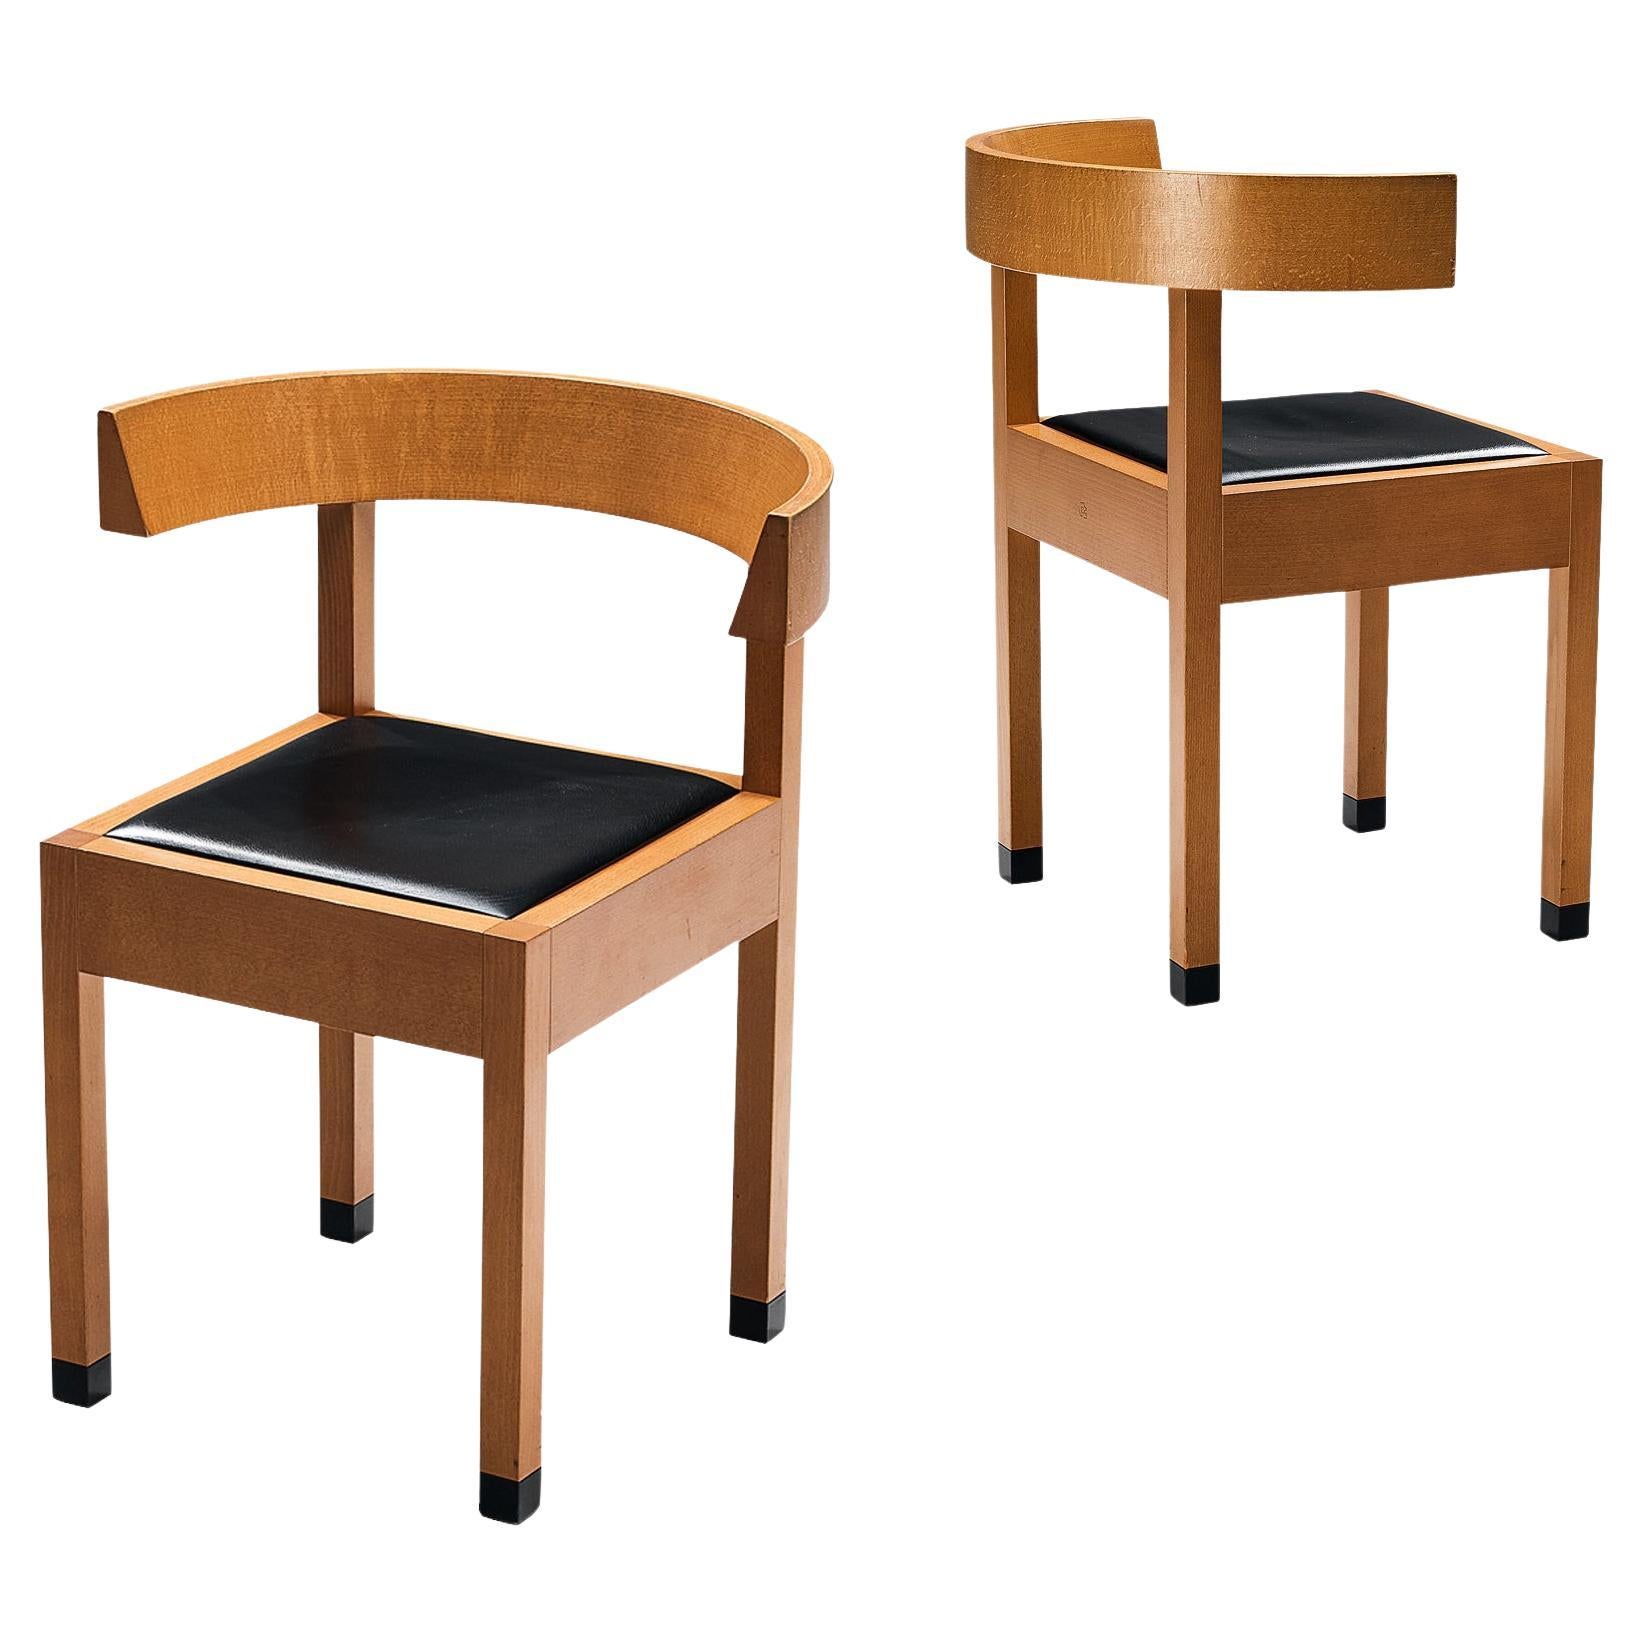 Oswald Mathias Ungers for Draenert Pair of 'Leonardo' Dining Chairs For Sale